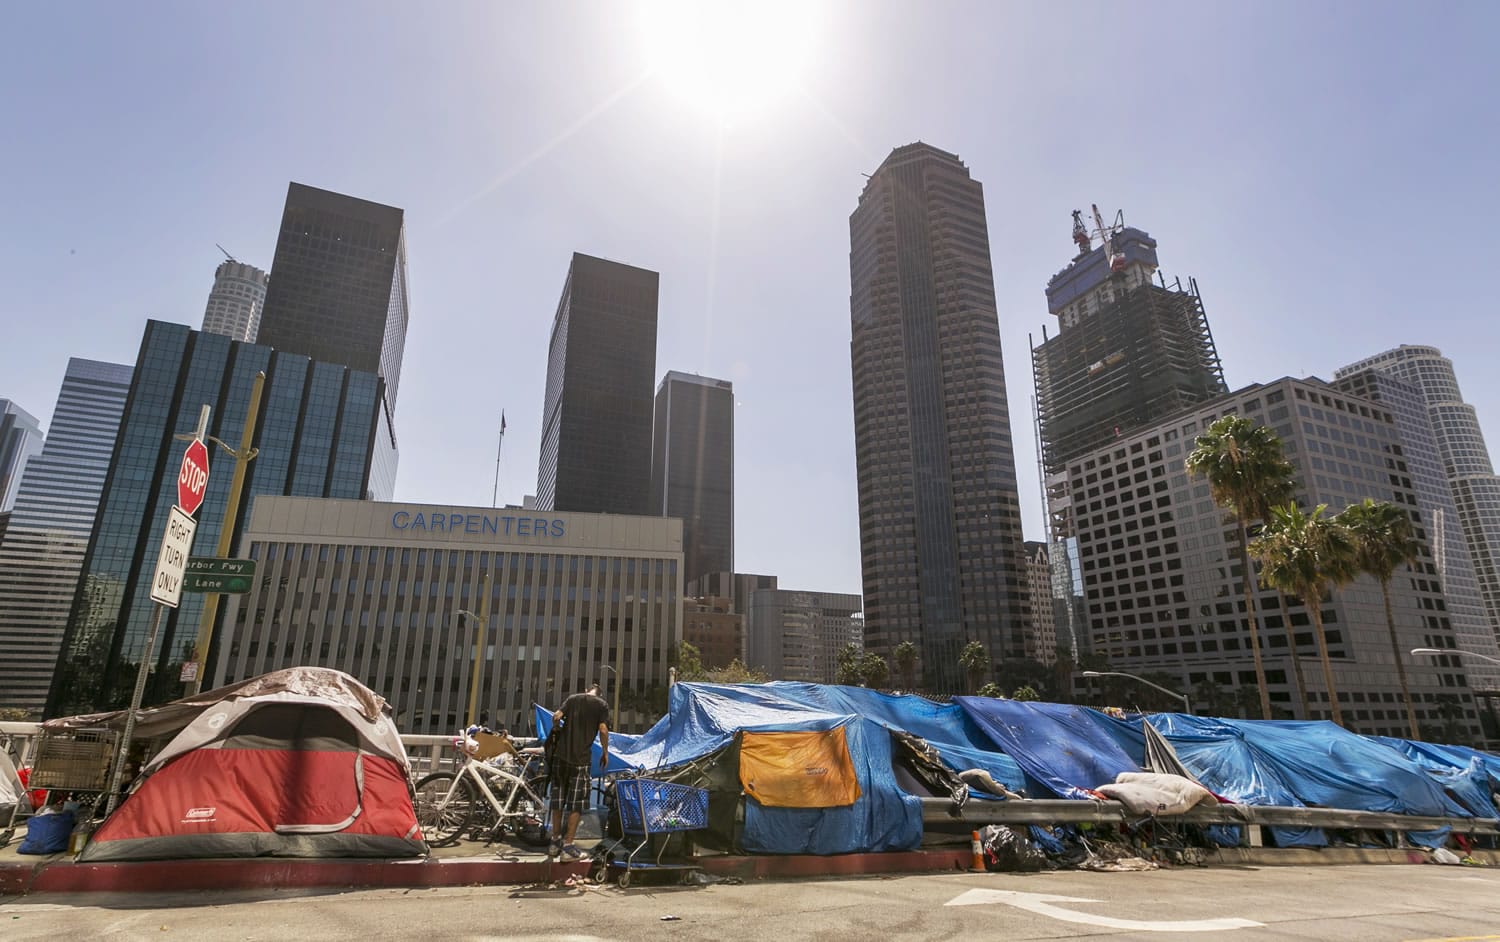 Tents used by the homeless line a downtown Los Angeles street with the skyline behind Tuesday, Sept. 22, 2015. Los Angeles officials say they will declare a state of emergency on homelessness and propose spending $100 million to reduce the number of people living on city streets.